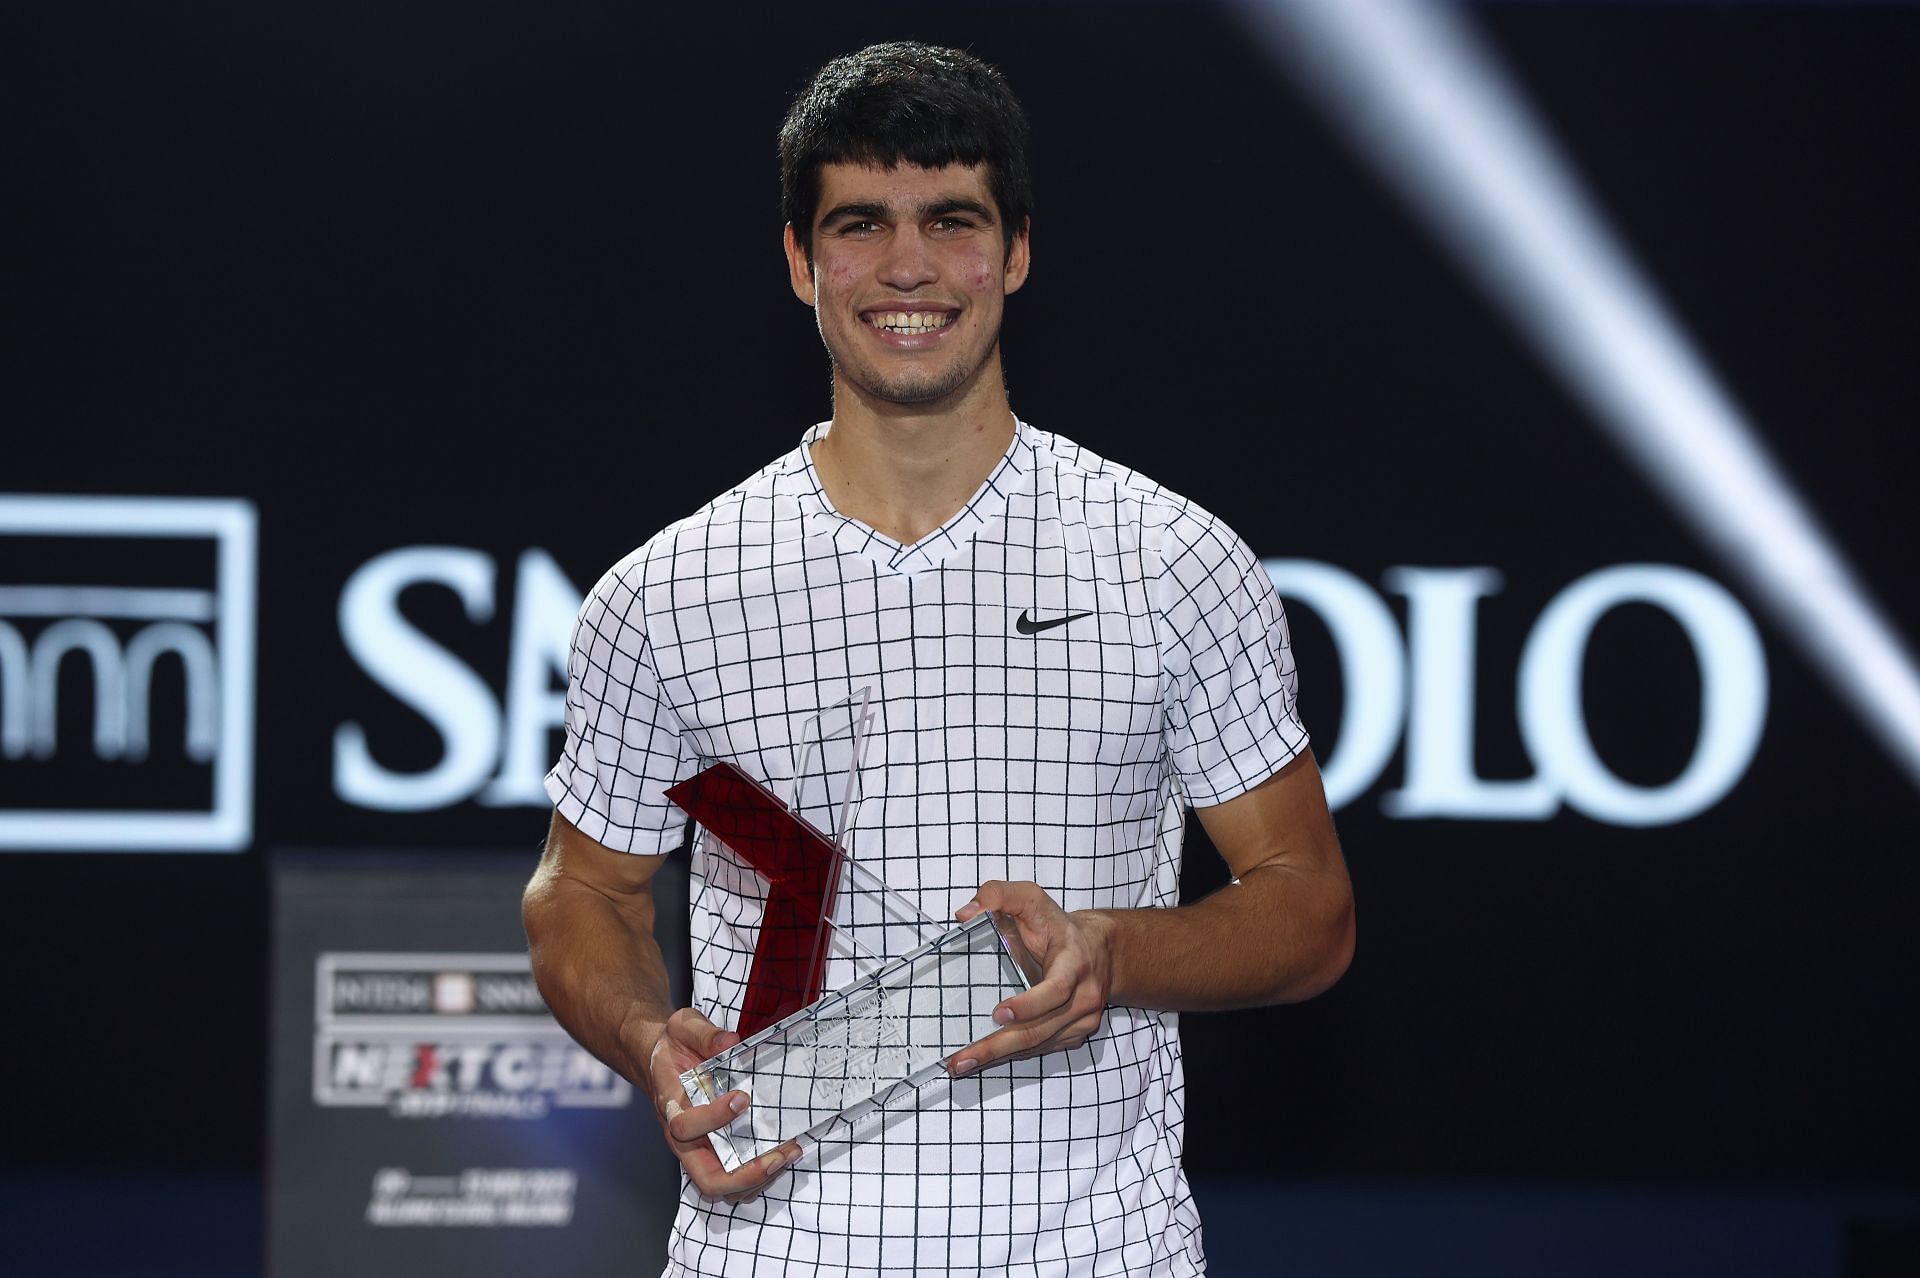 Carlos Alcaraz is the youngest Spaniard to win an ATP tour title since the Mallorcan